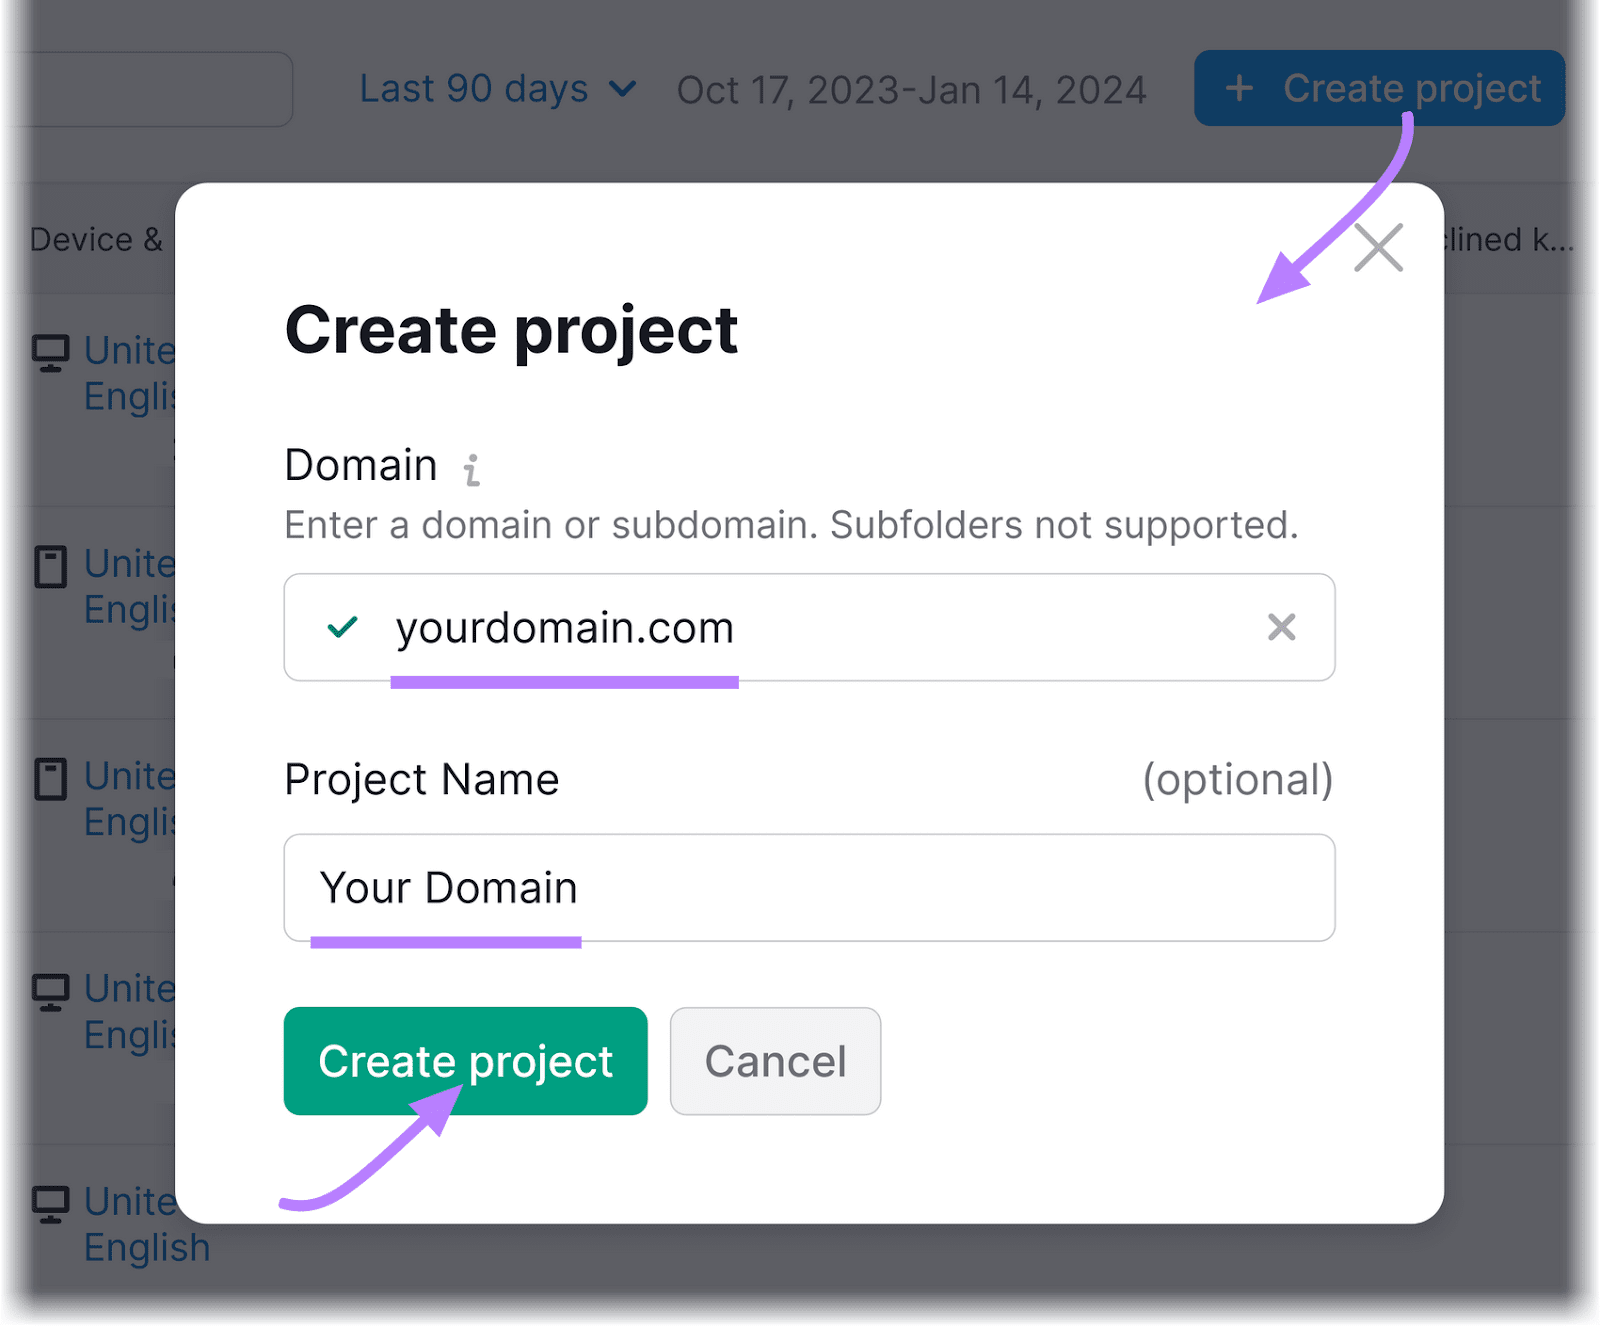 "Create project" pop-up model   successful  Position Tracking tool